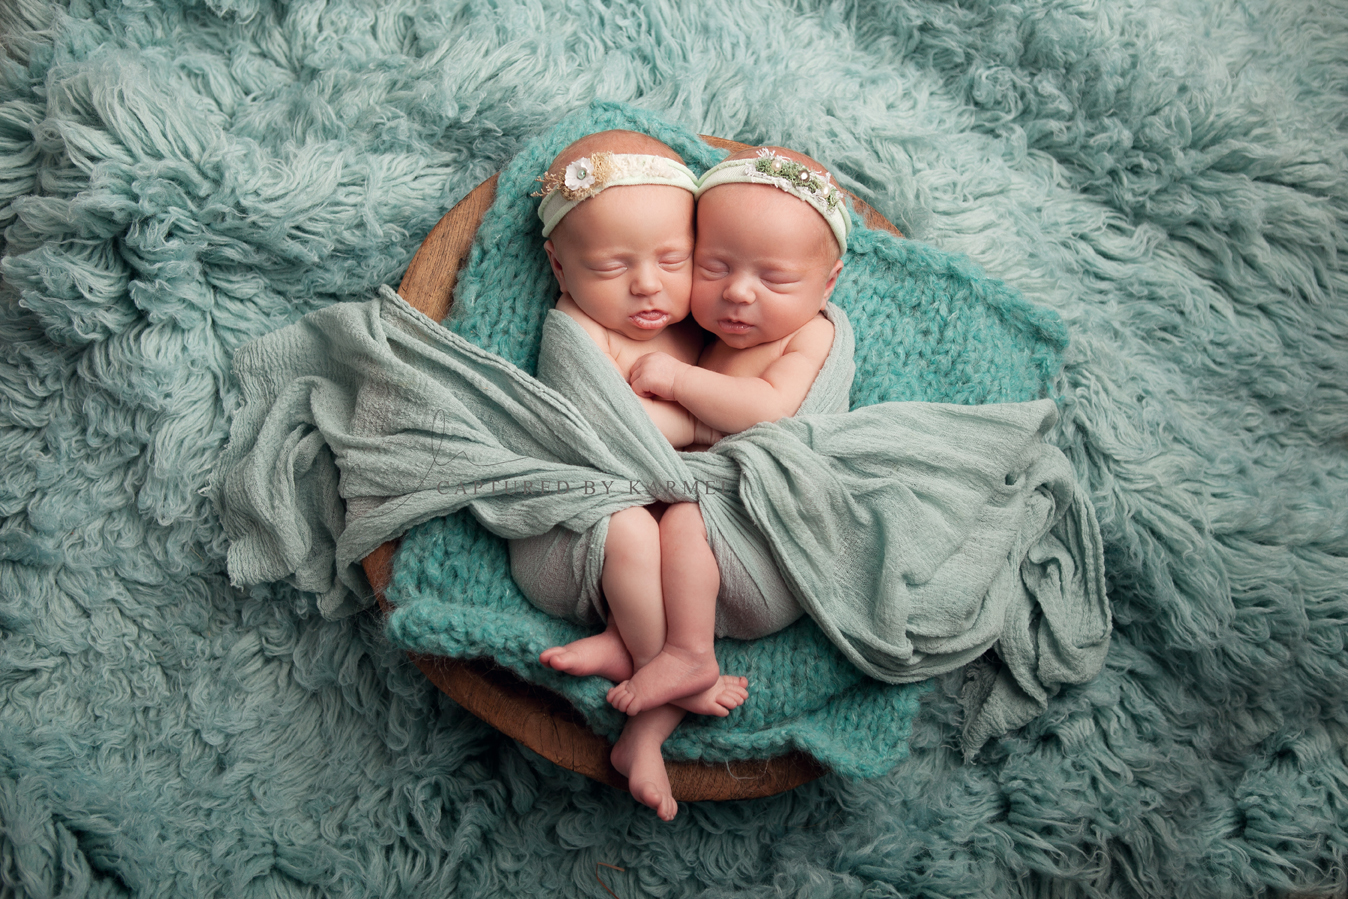 identical twins wrapped together and asleep for photo session